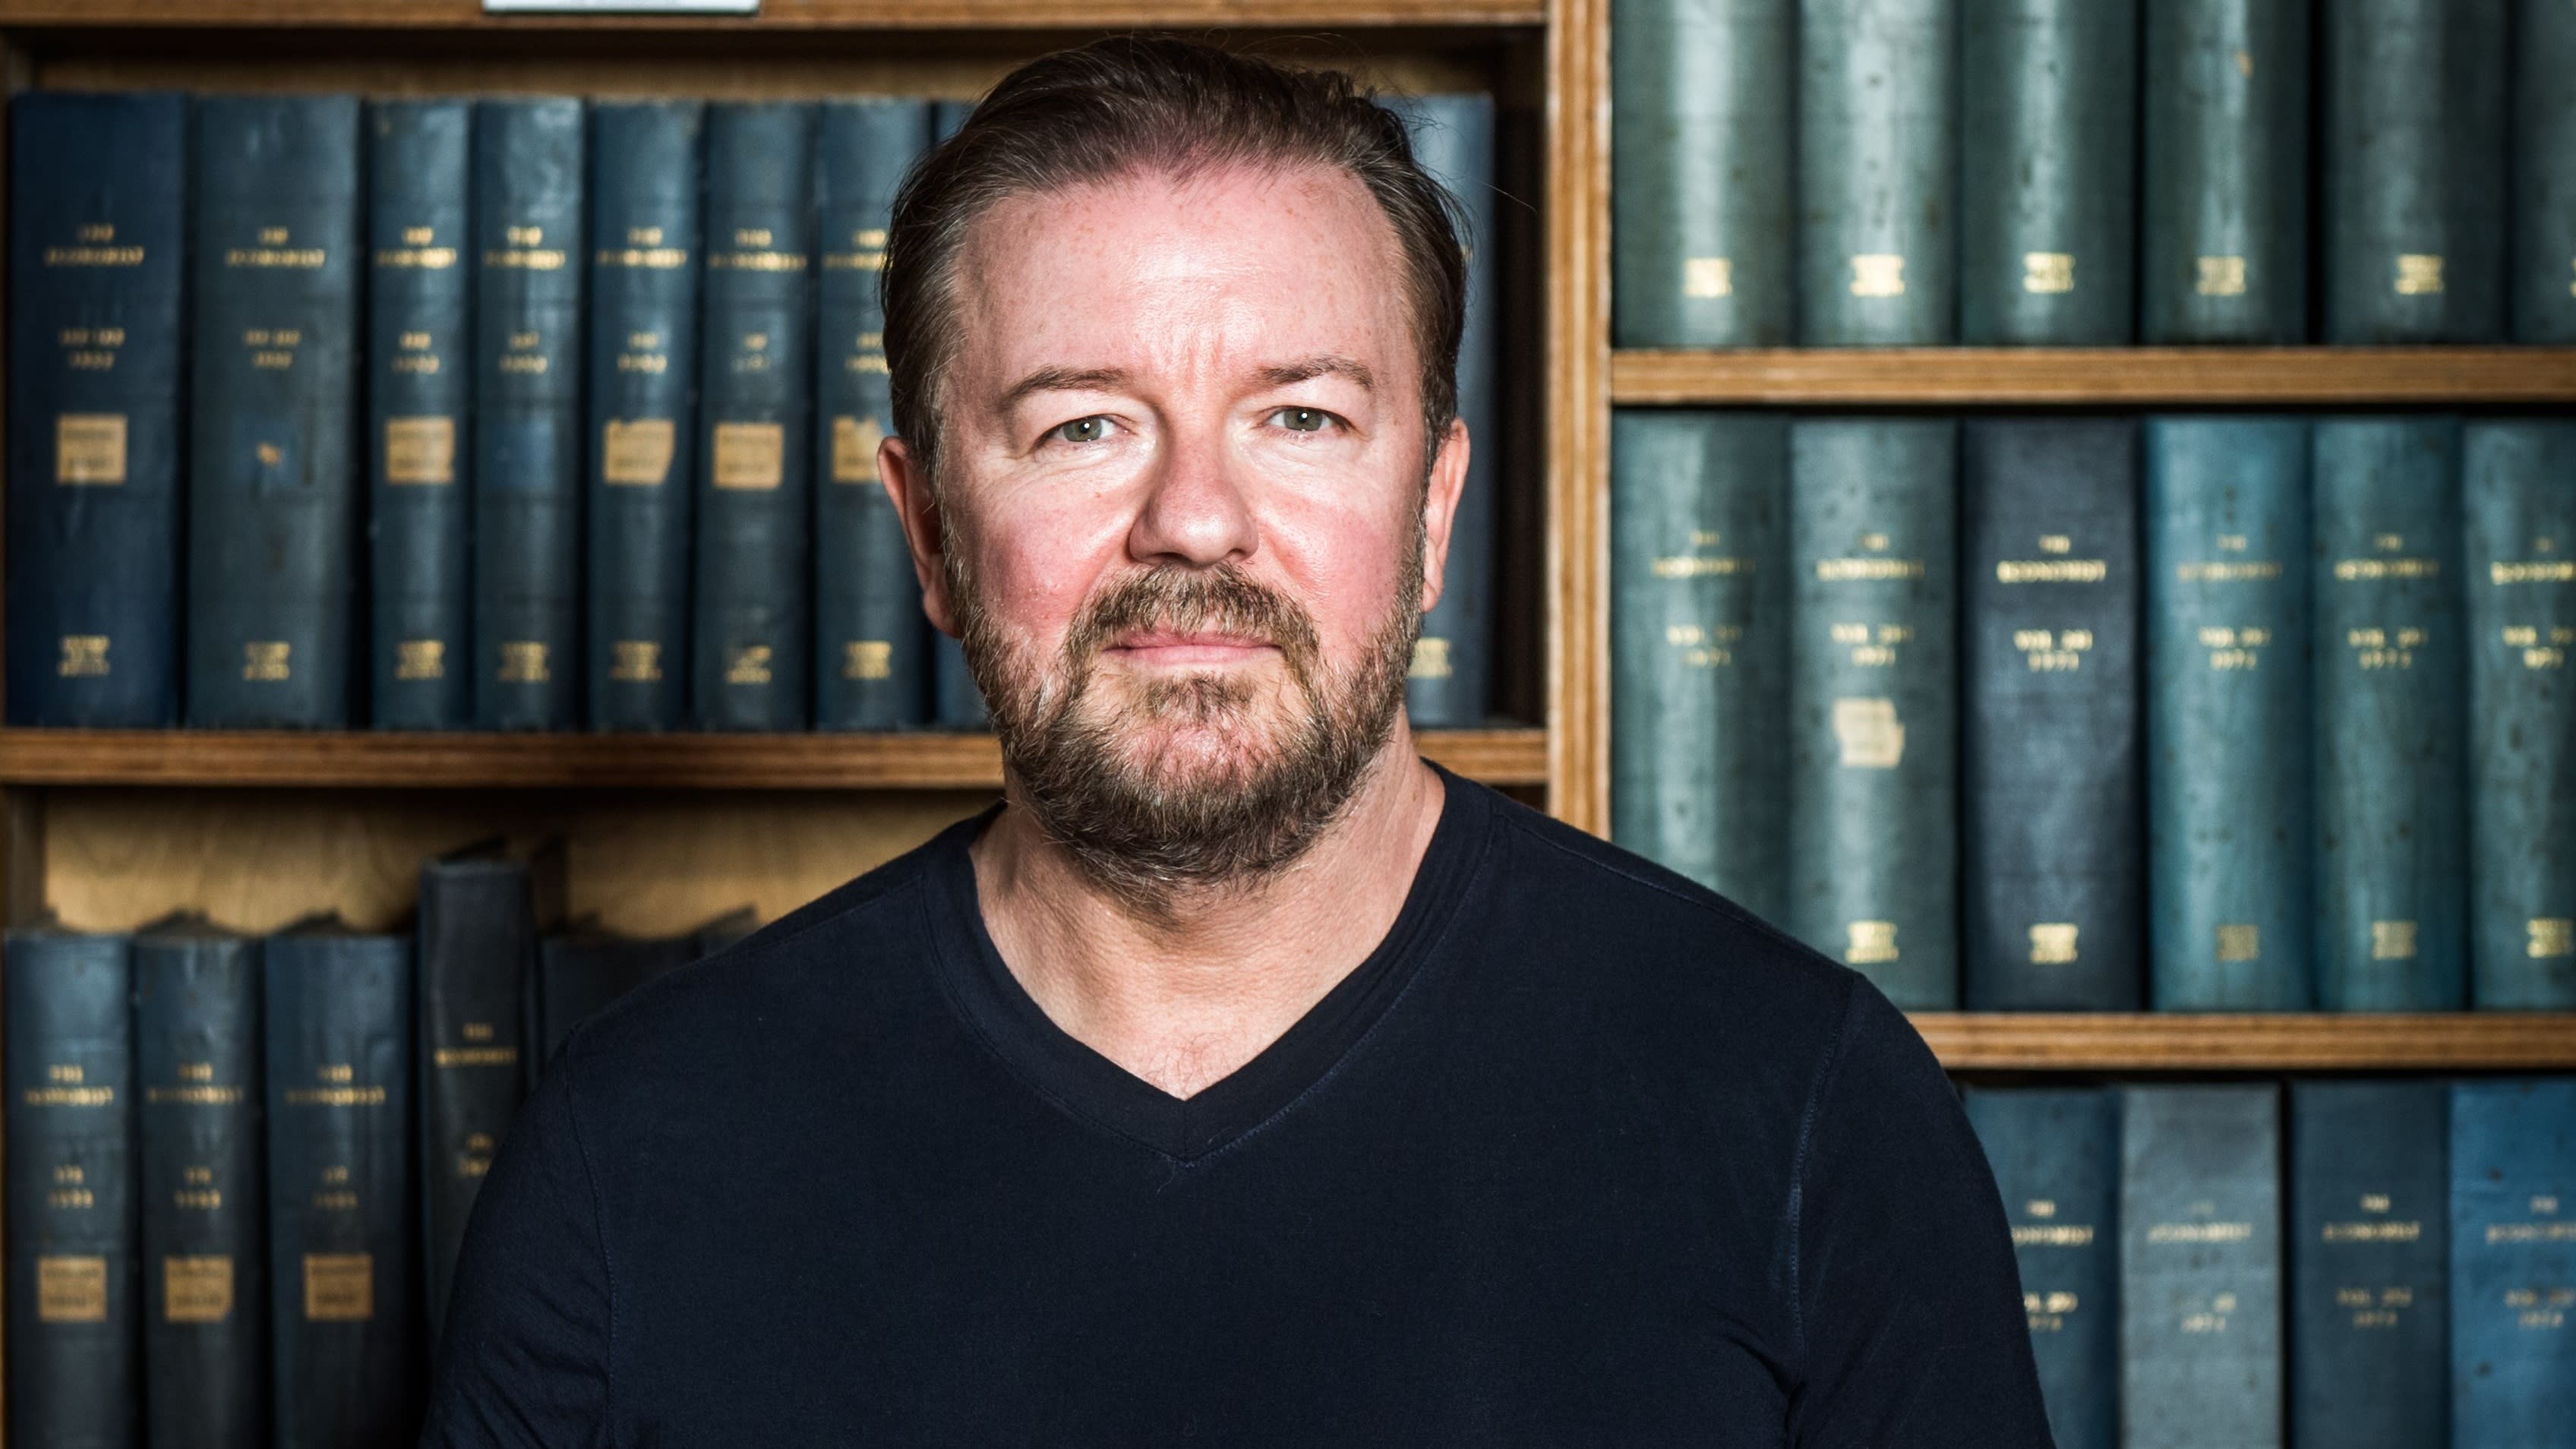 Ricky Gervais on New SiriusXM Talk Show: They ‘Made Me an Offer I Couldn’t Refuse’